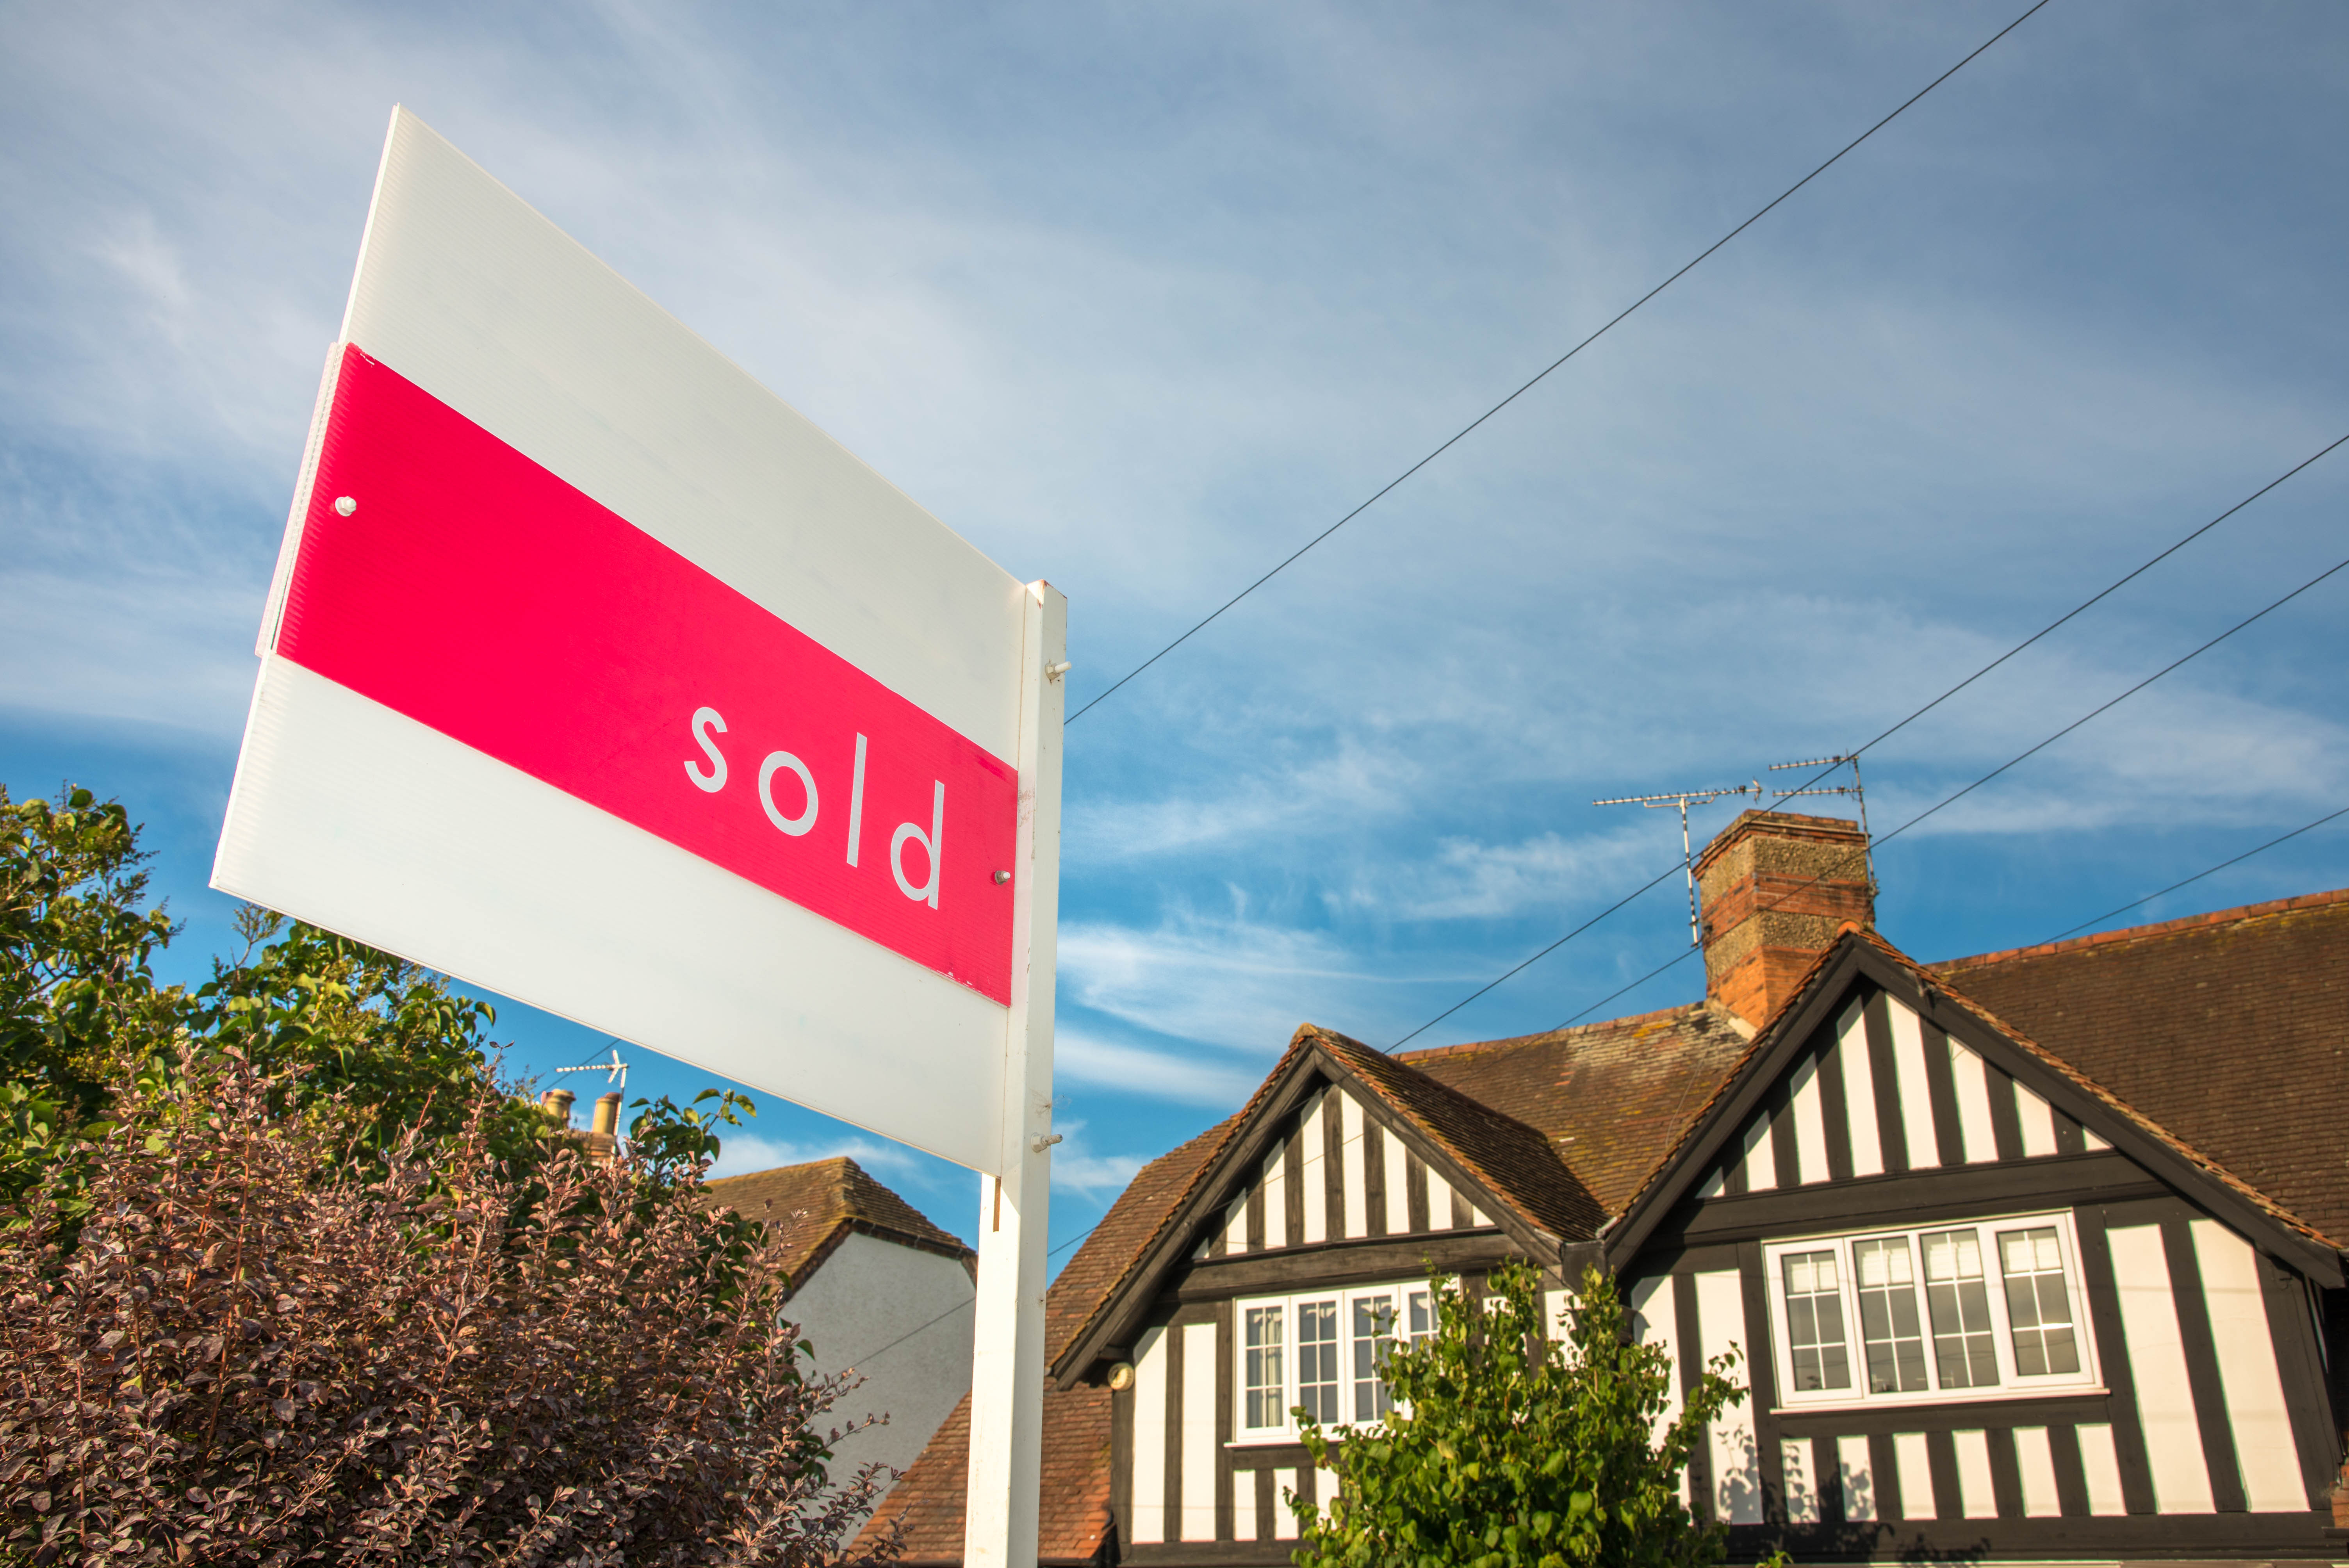 Barrows and Forrester: Property transactions in England down 71% since March